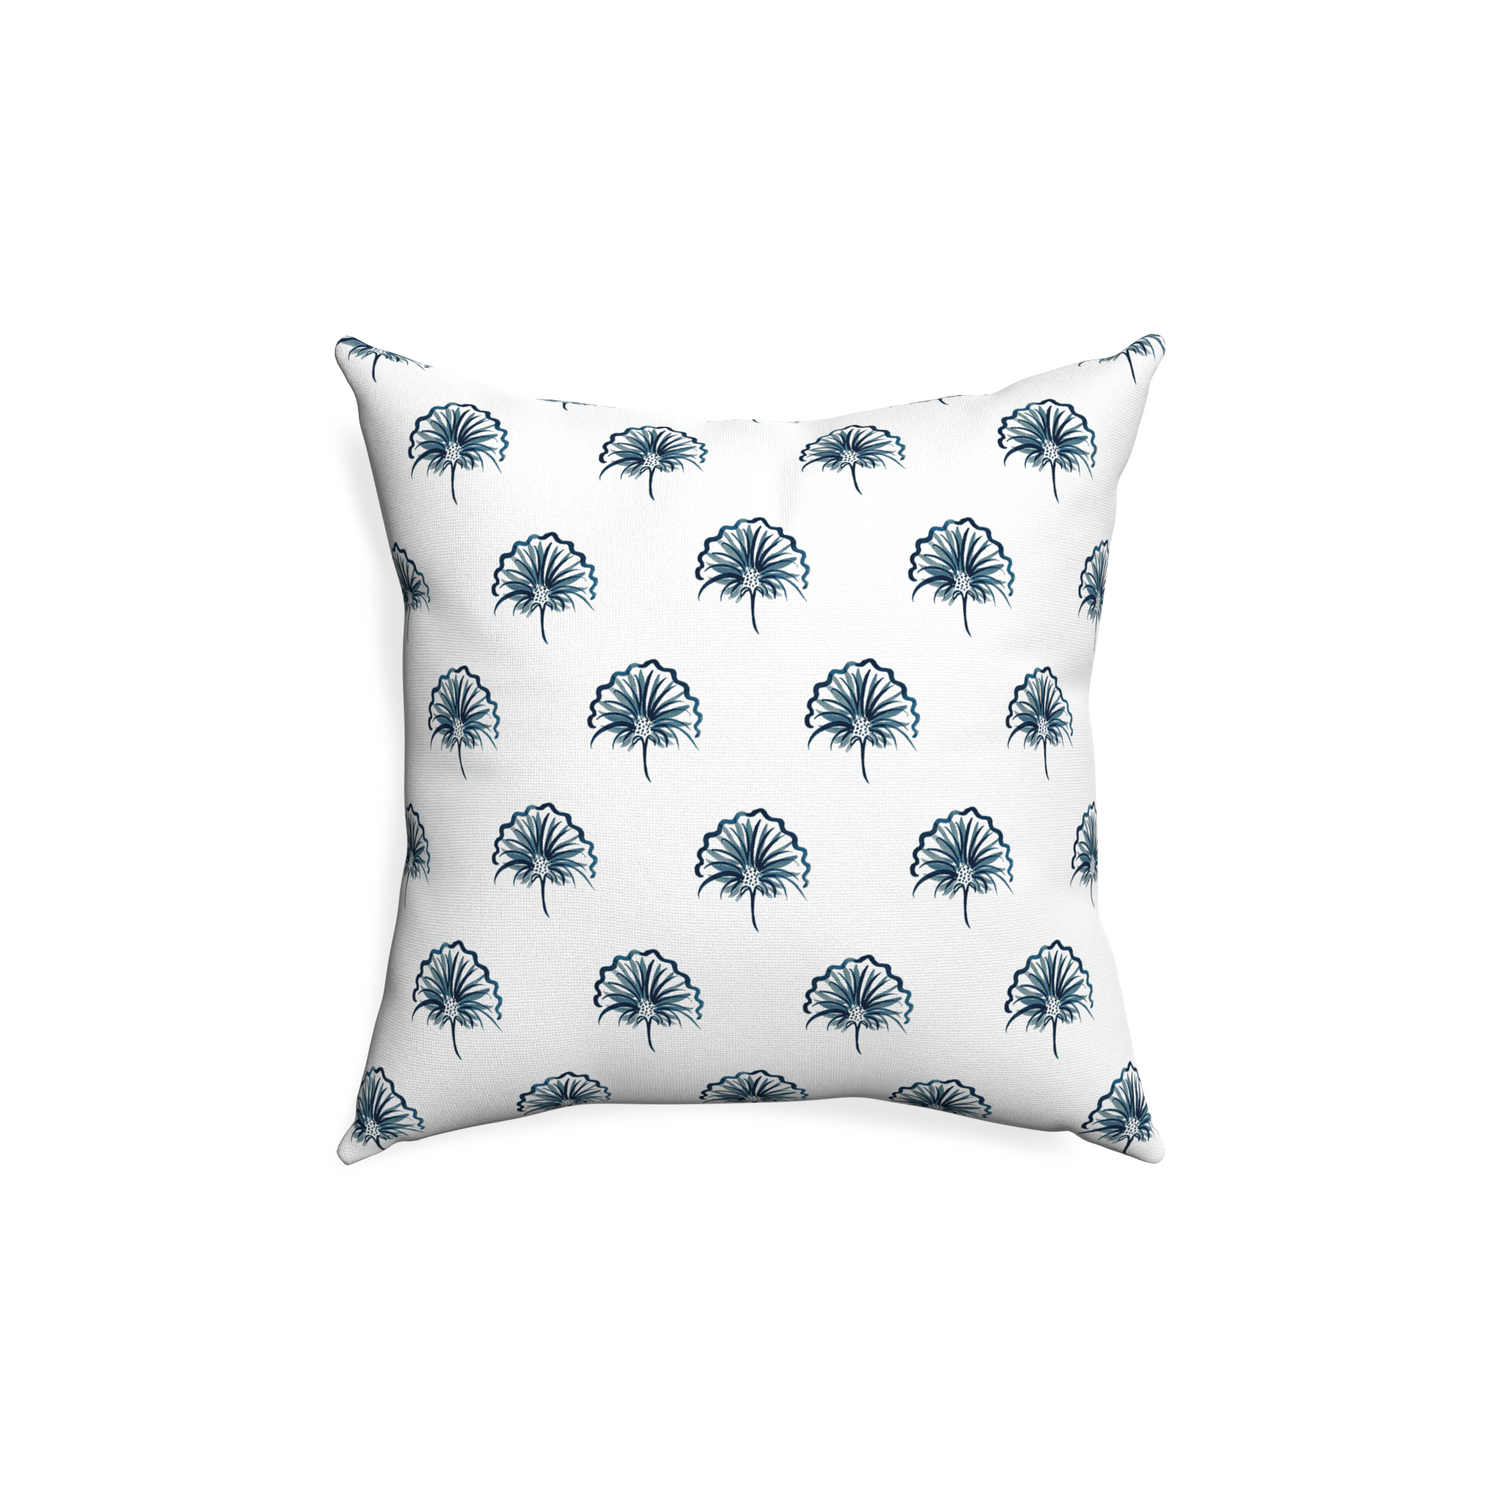 18-square penelope midnight custom floral navypillow with none on white background